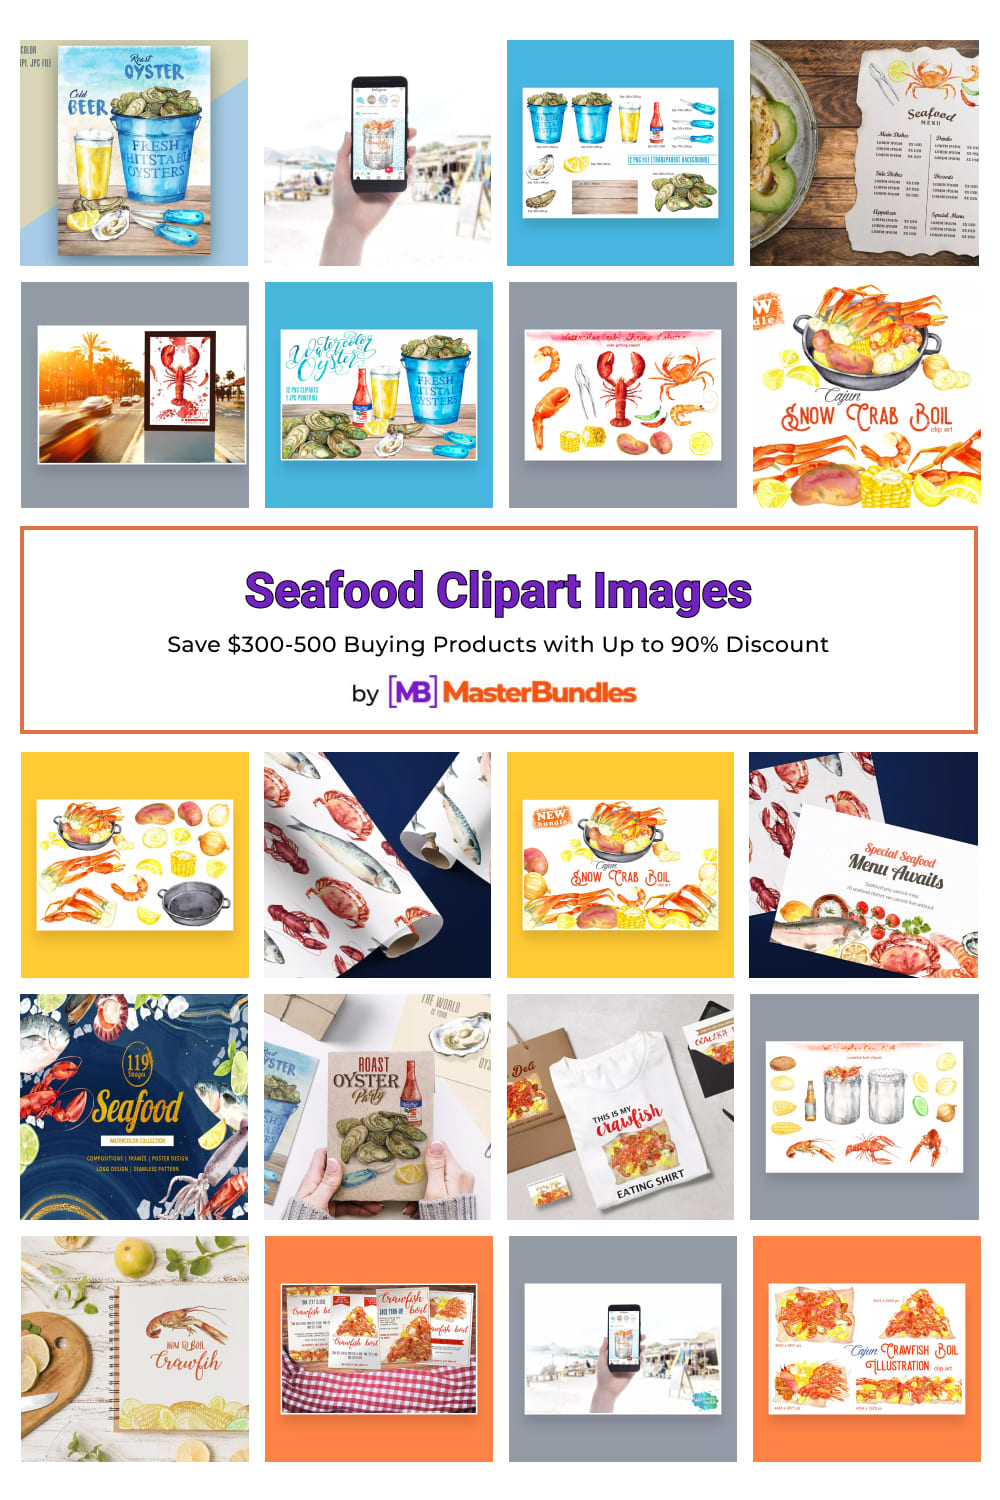 Seafood Clipart Images Pinterest image.